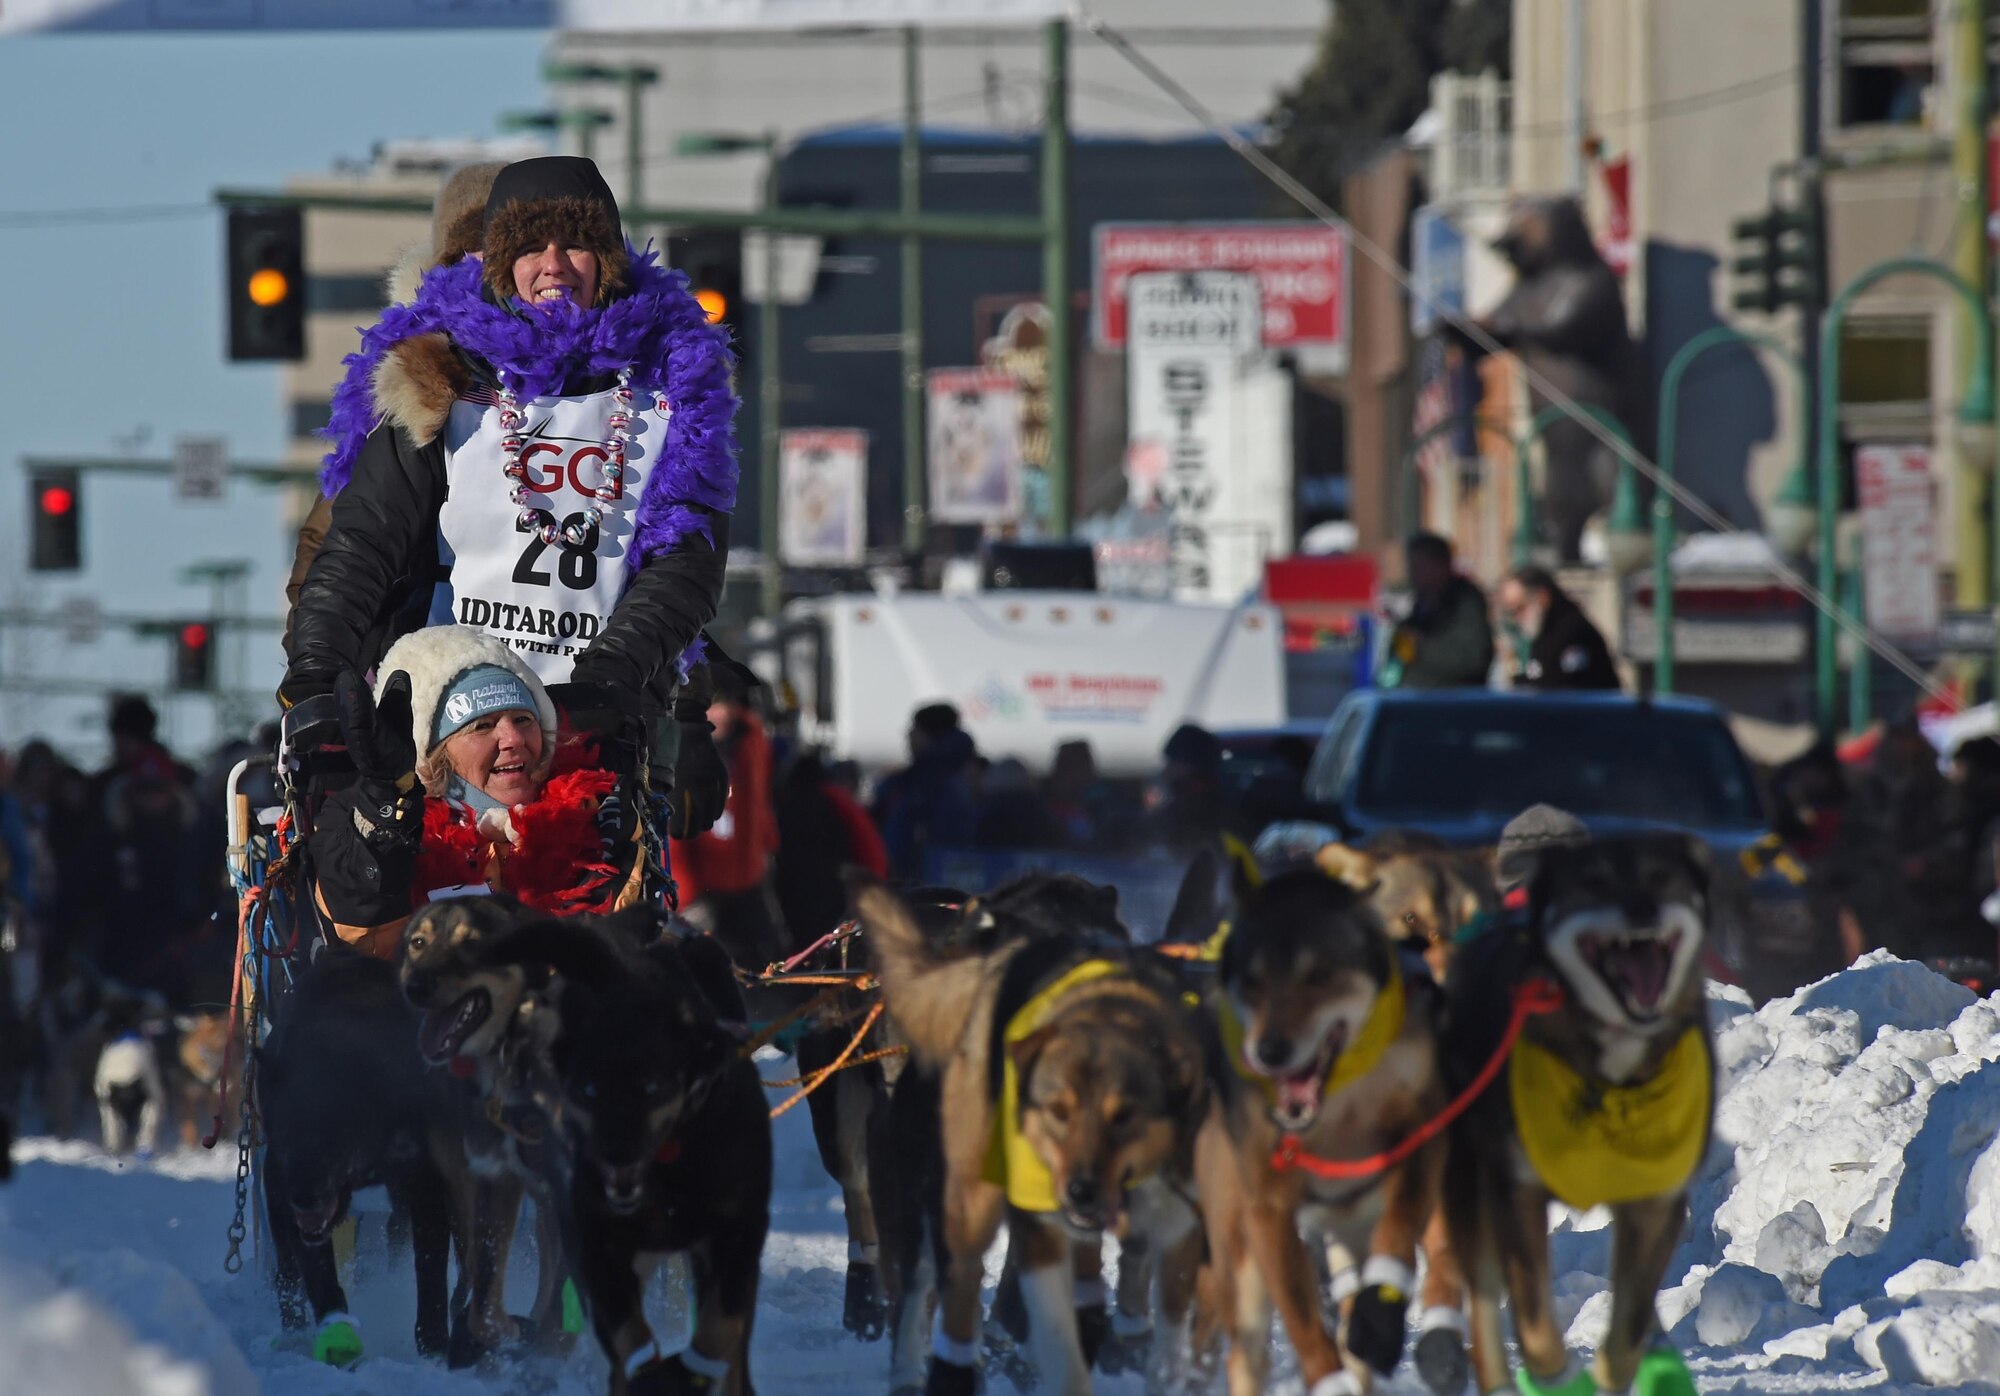 Jodi Bailey, an Iditarod musher, rides down 4th avenue during the 45th annual Iditarod Trail Sled Dog Race in Anchorage, Alaska, March 4, 2017. More than 1,150 dogs pulled 72 mushers for the day’s 11 mile run to Campbell Airstrip. 